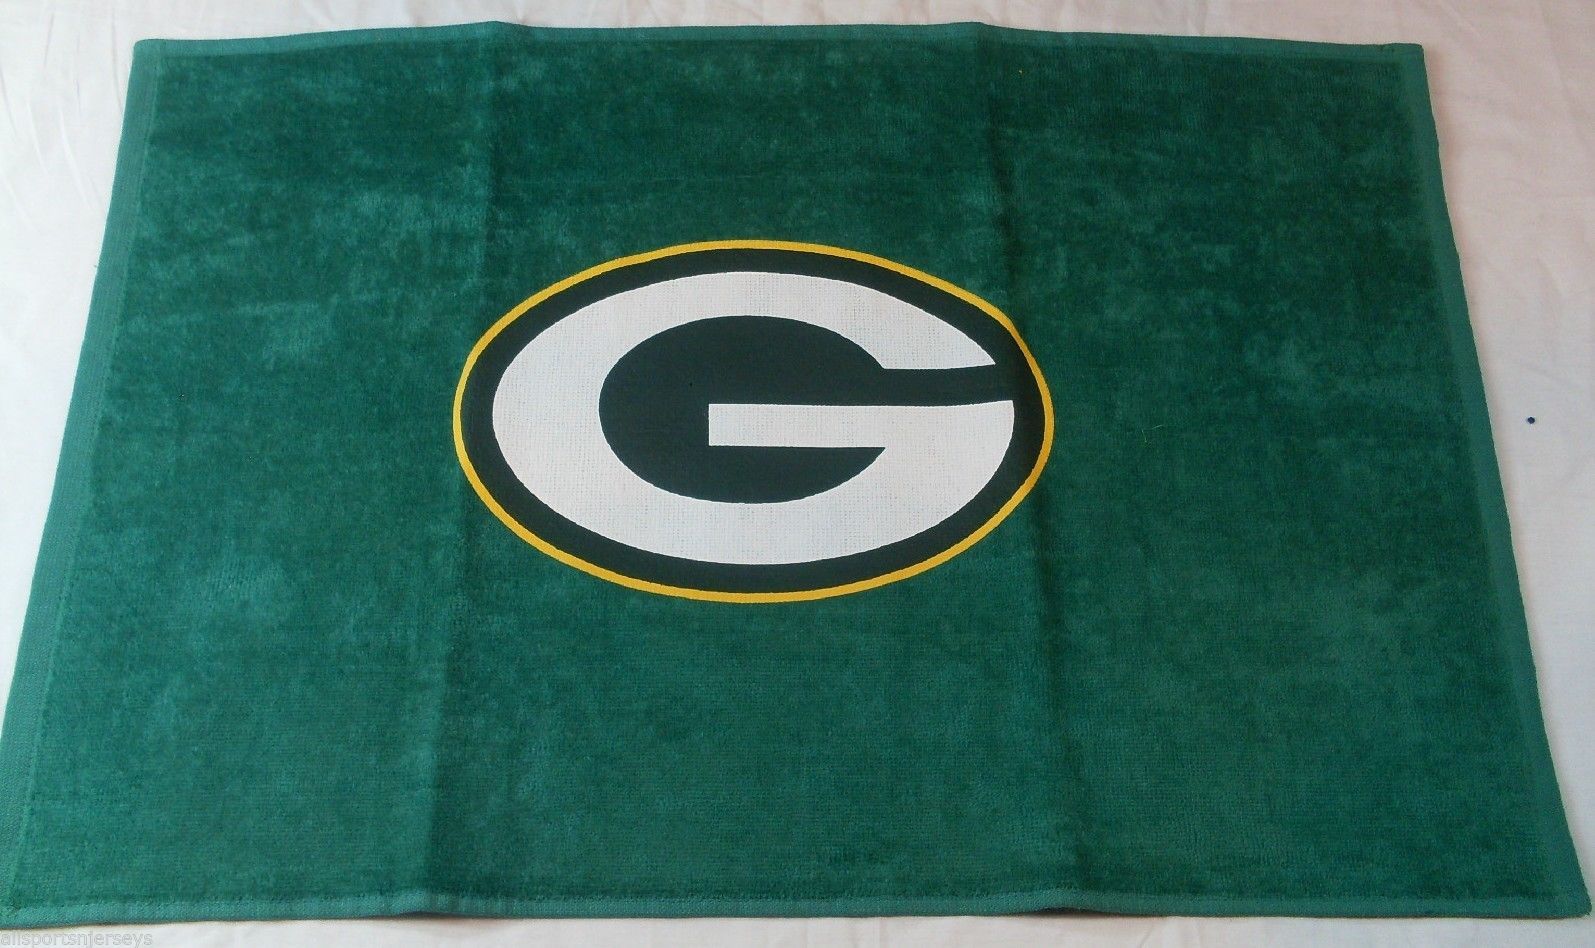 Primary image for NFL Green Bay Packers Sports Fan Towel Green 15" by 25" by WinCraft